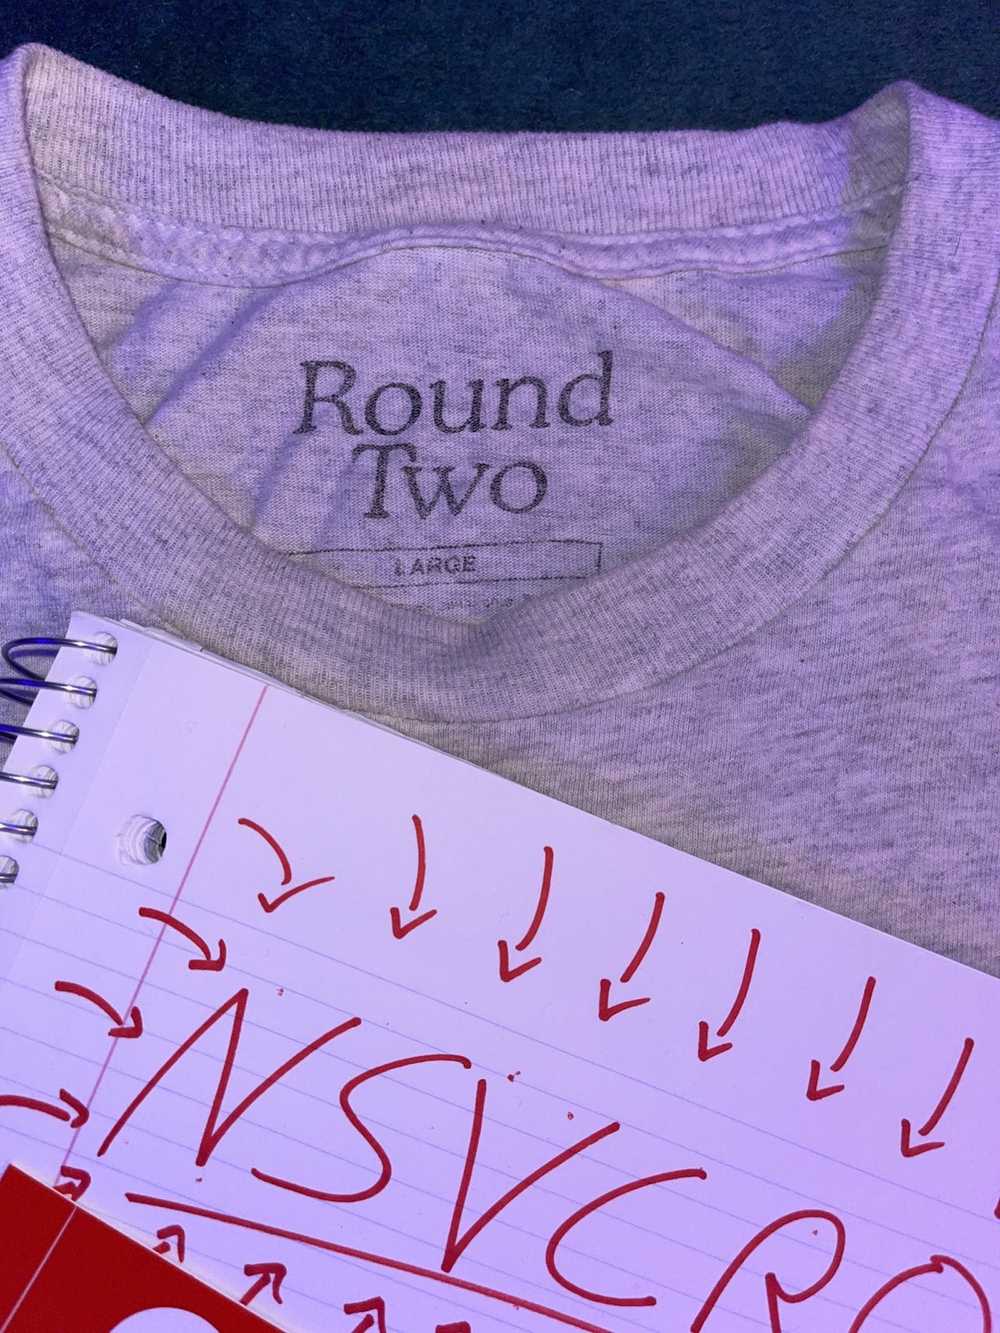 Round Two Round two Melrose tee - image 2